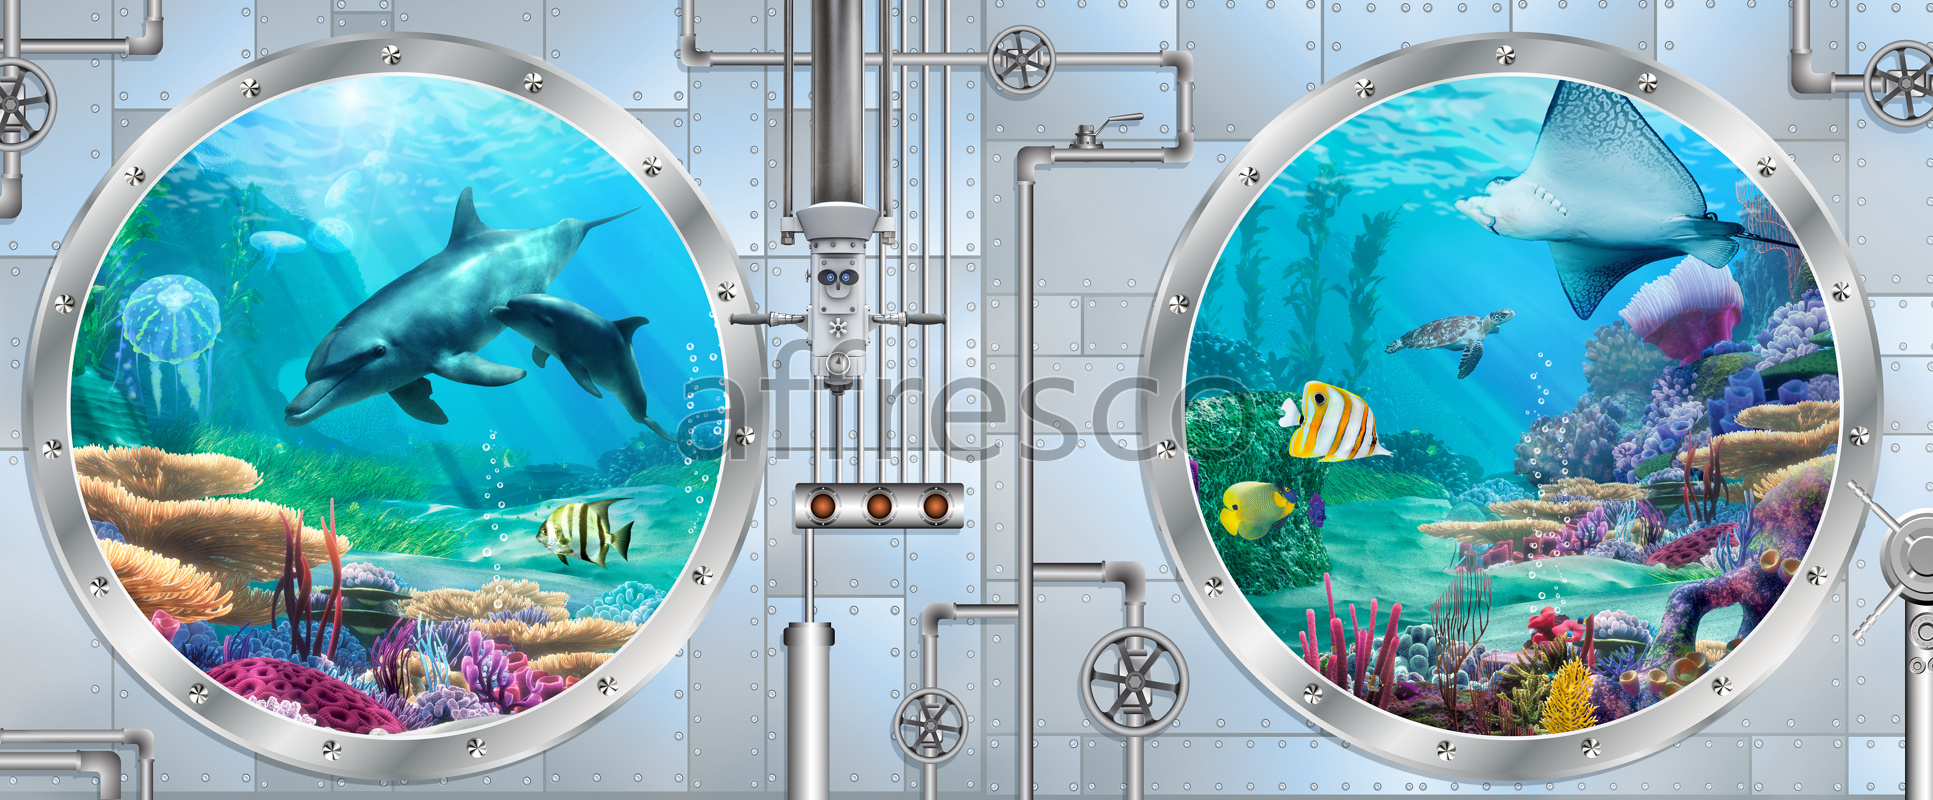 6511 | The best landscapes | View from the Bathyscaphe porthole | Affresco Factory